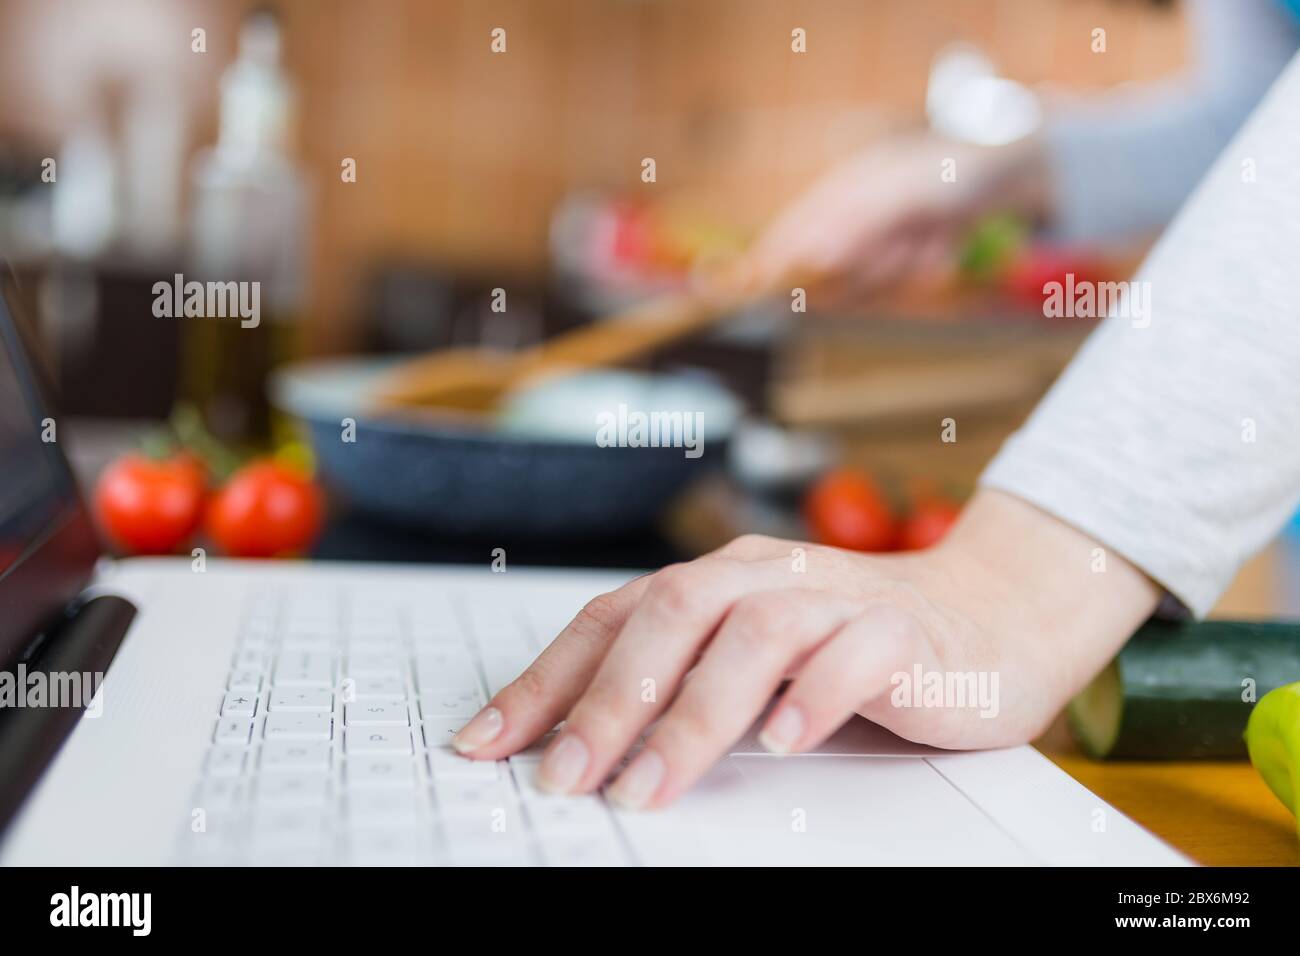 Woman cooking healthy meal. Food blog concept. Work from home multitasking. Stock Photo